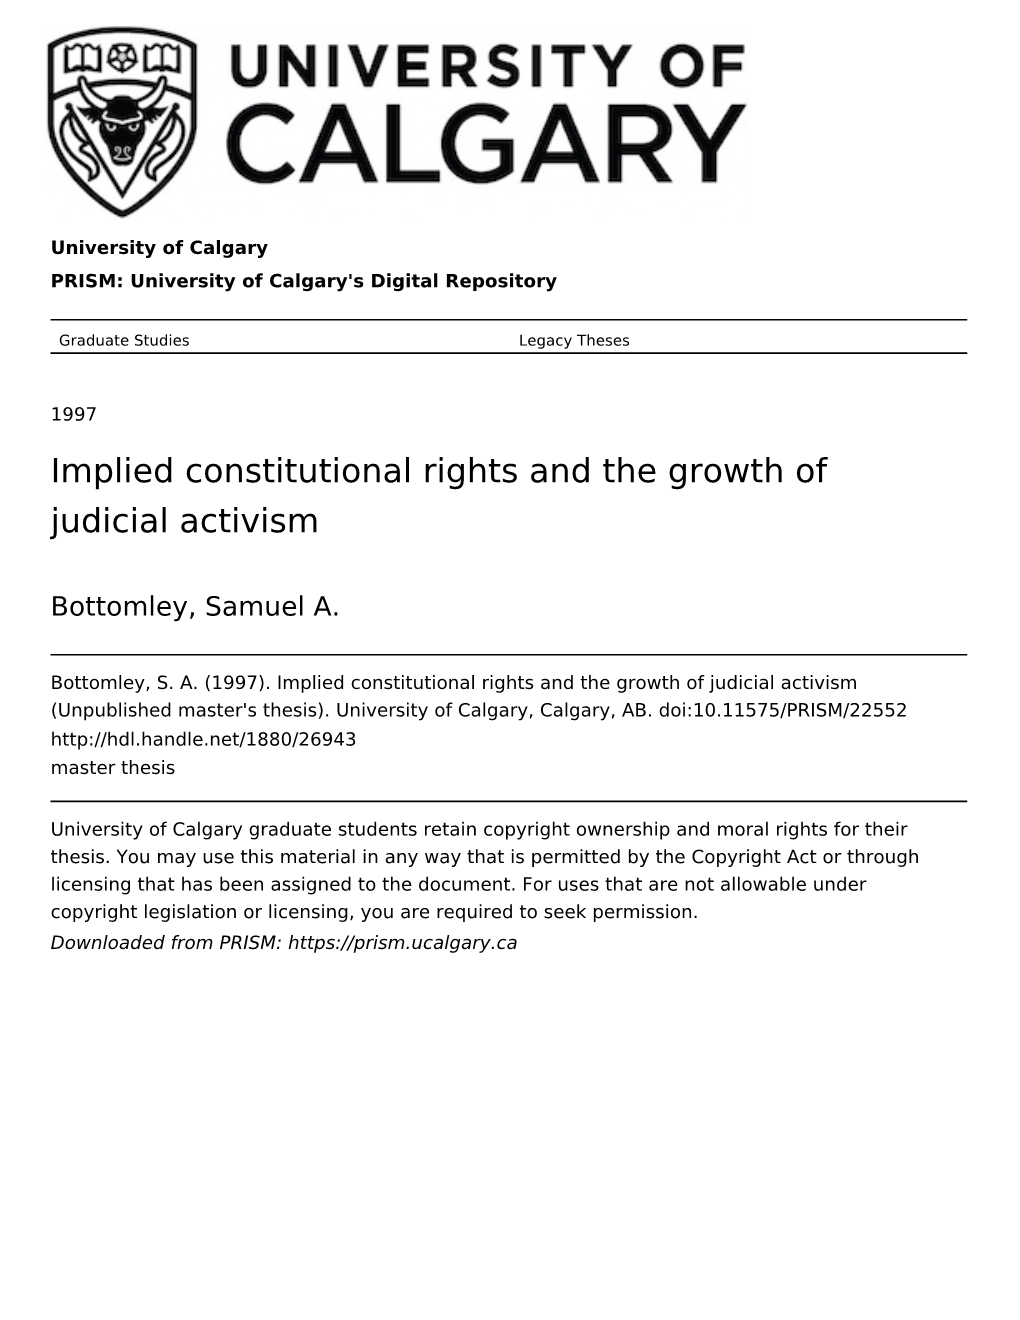 Implied Constitutional Rights and the Growth of Judicial Activism